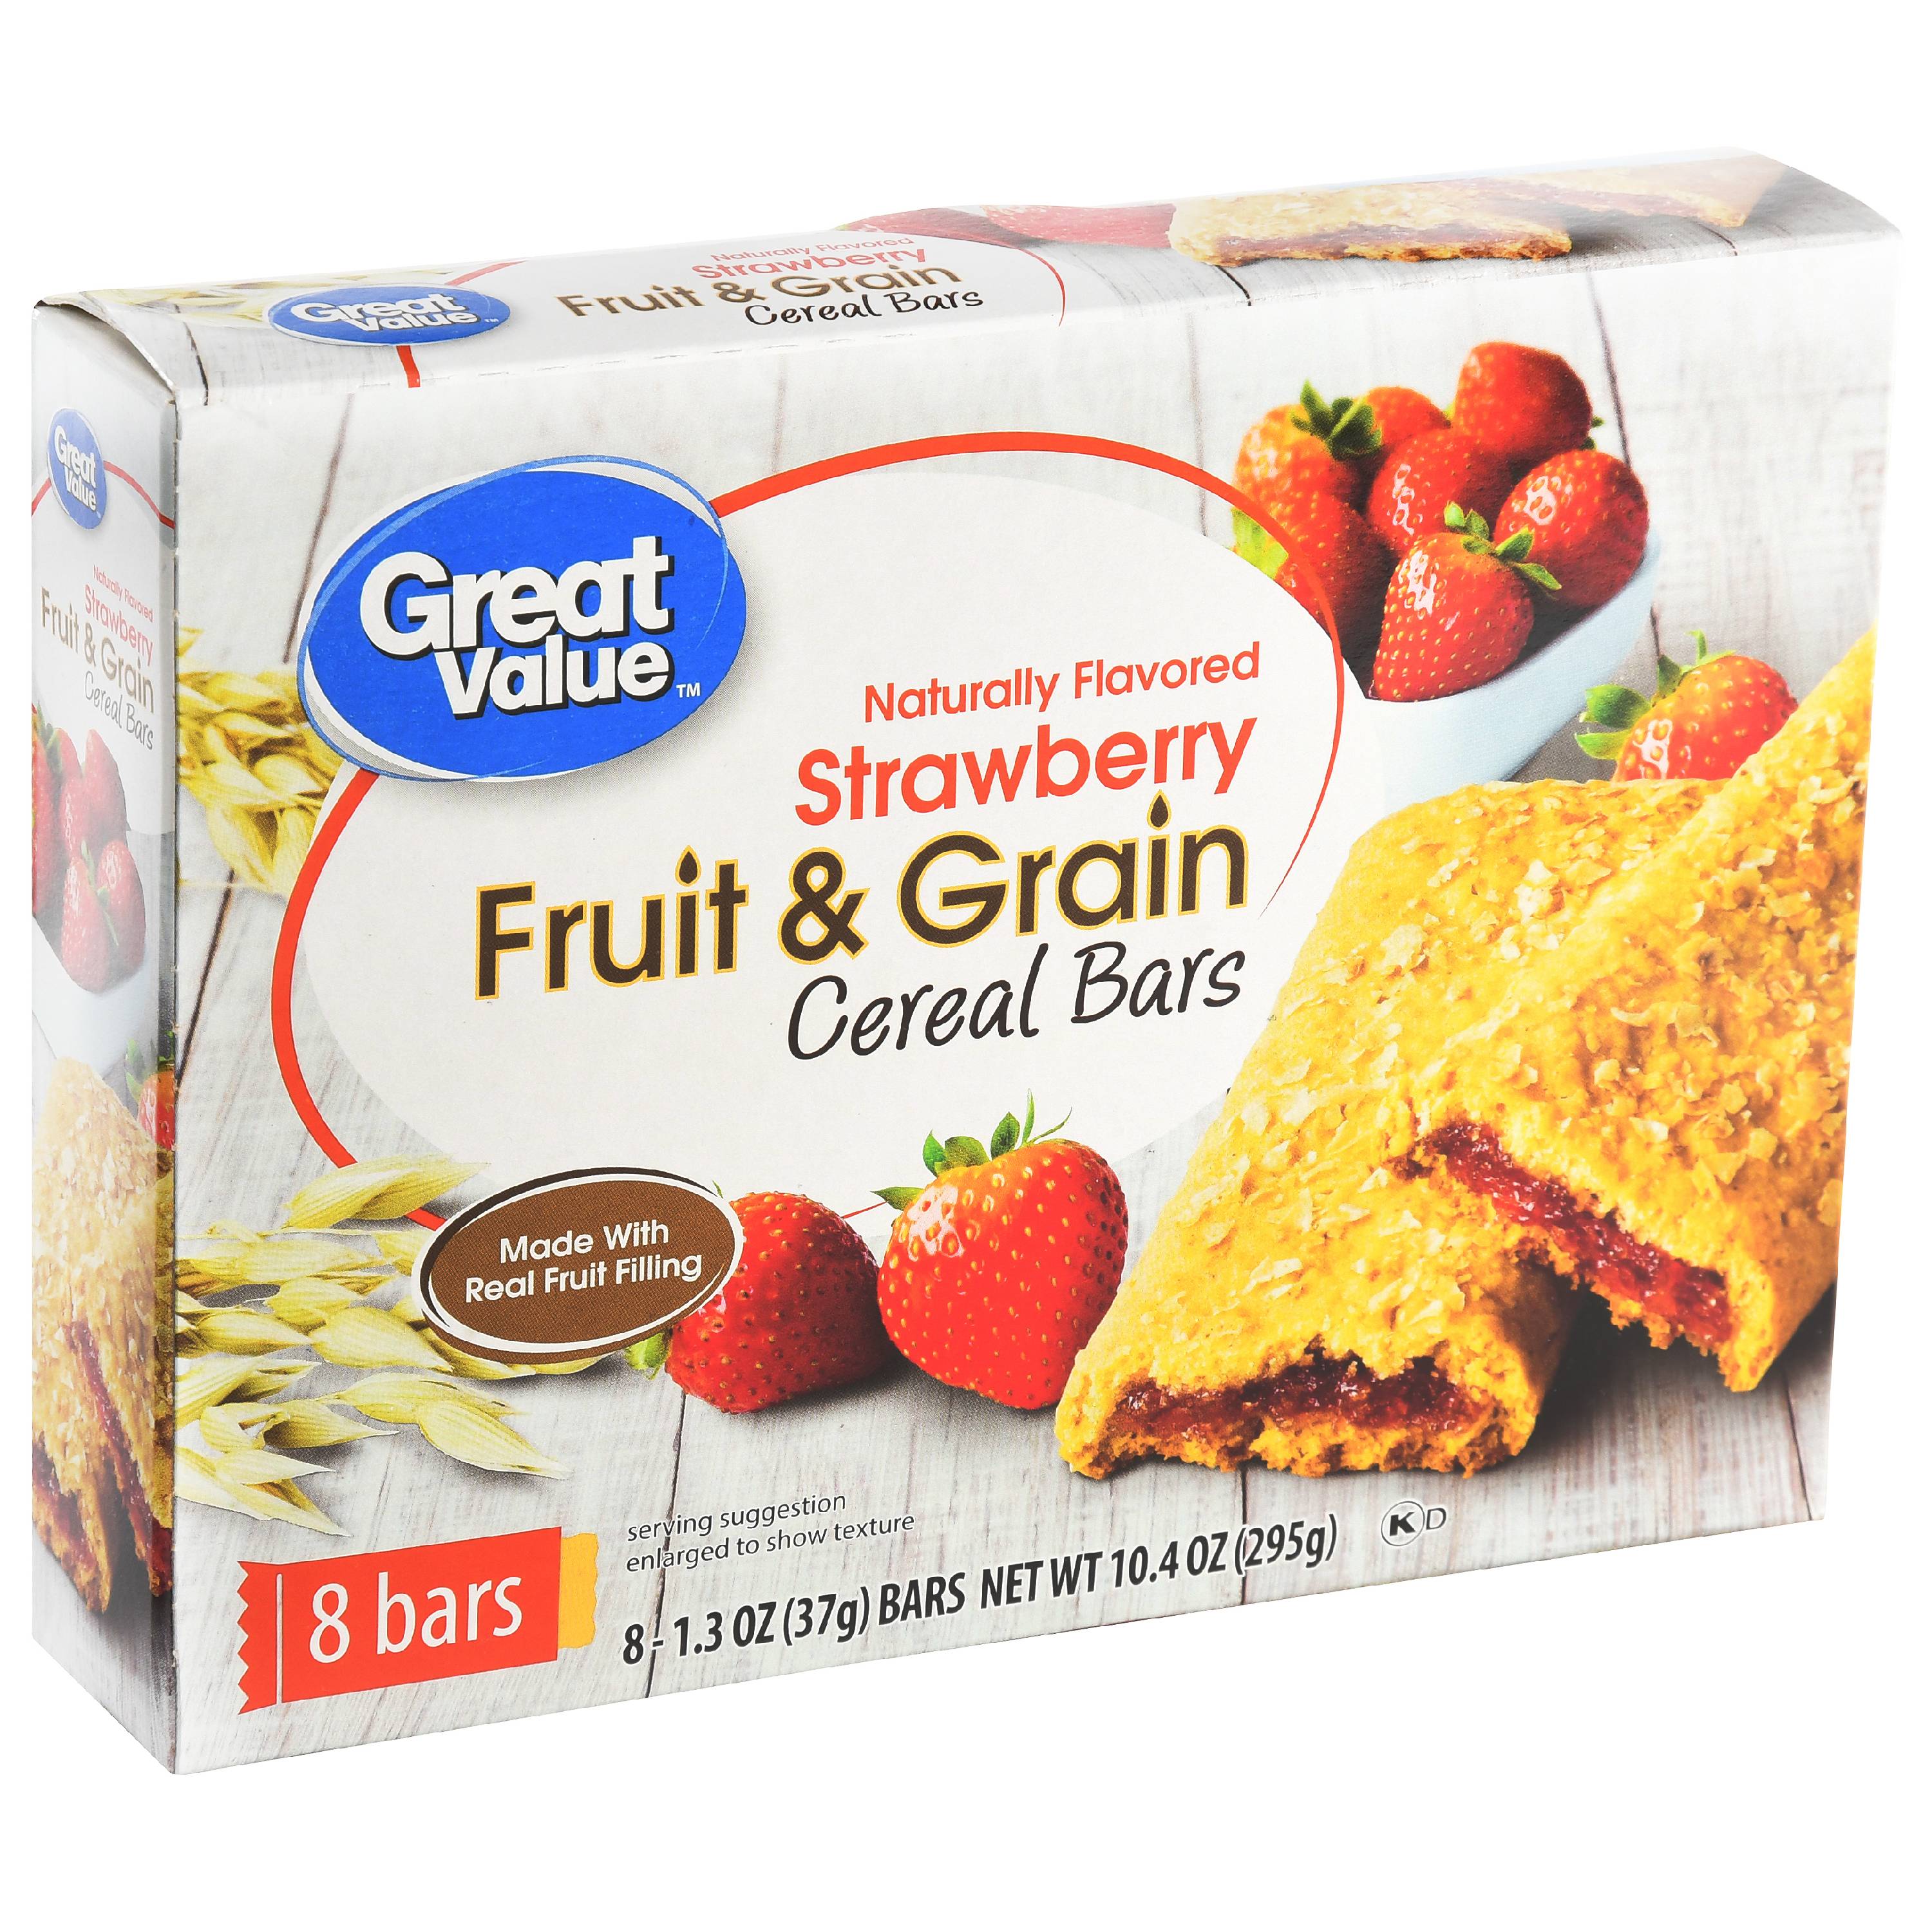 Great Value Fruit & Grain Cereal Bars Strawberry 1.3 Oz 8 Count Image